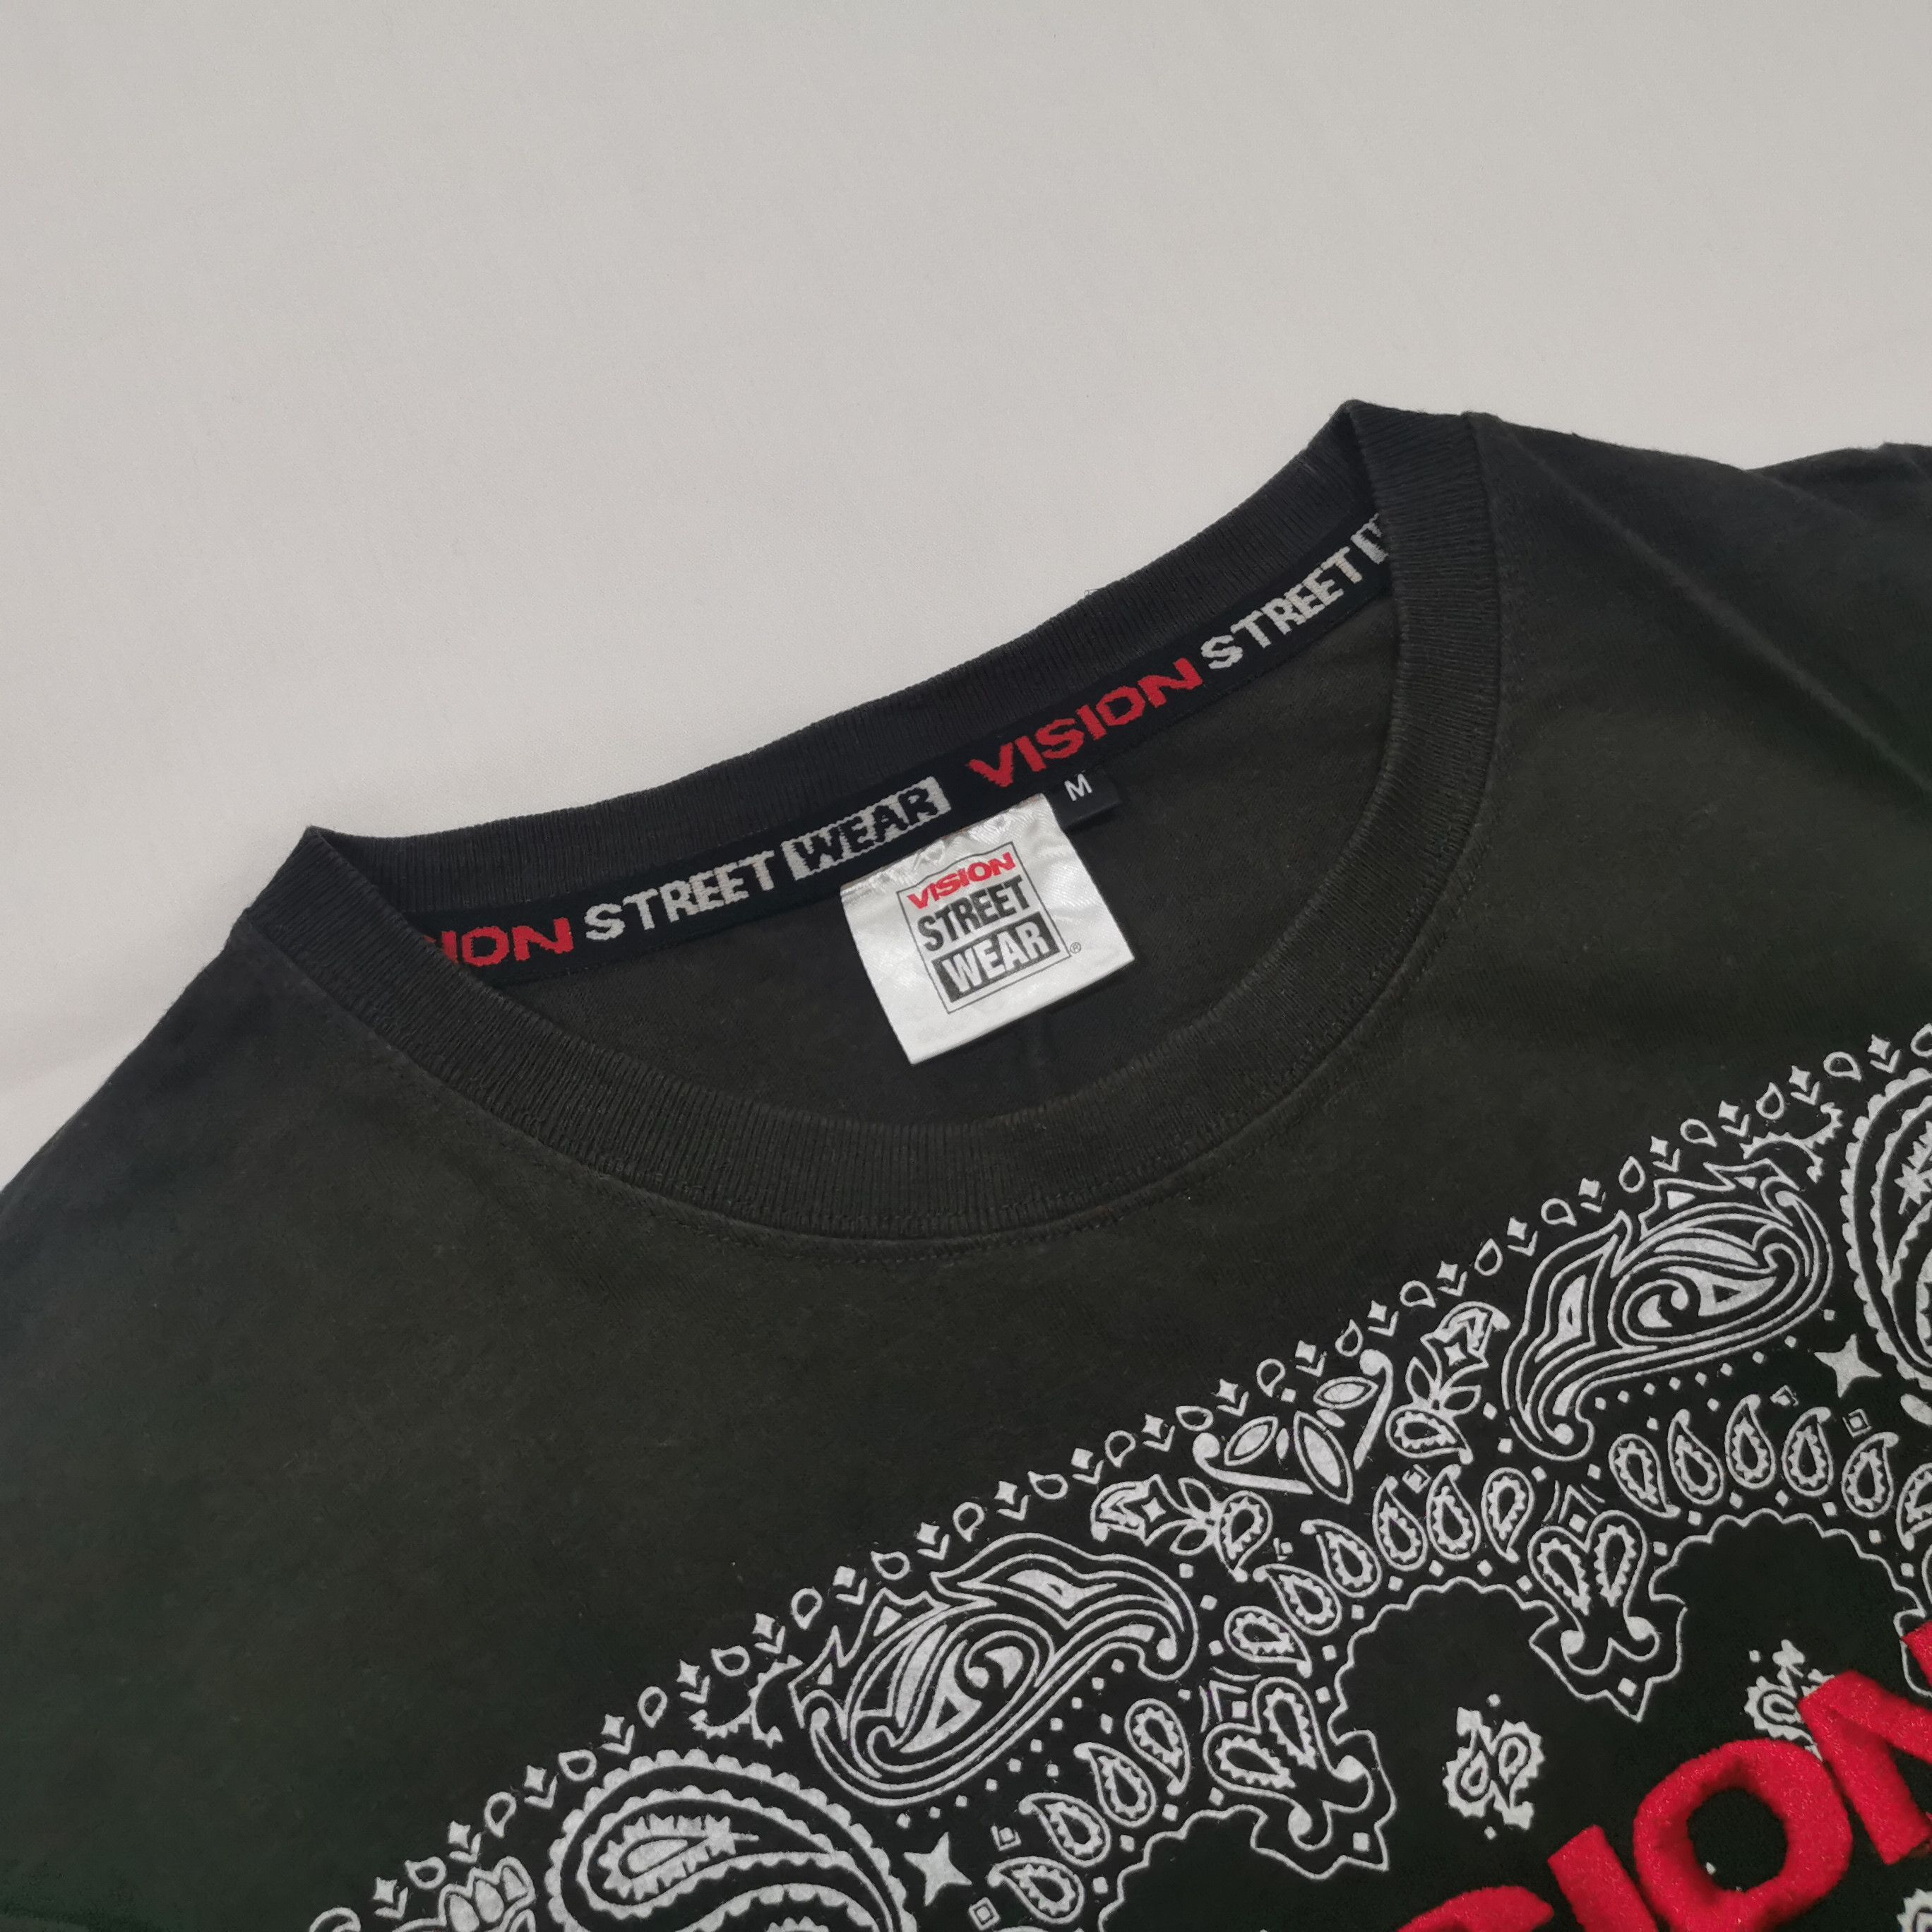 Vintage - Vision Street Wear Embroidery Spell Out Tshirt - 5